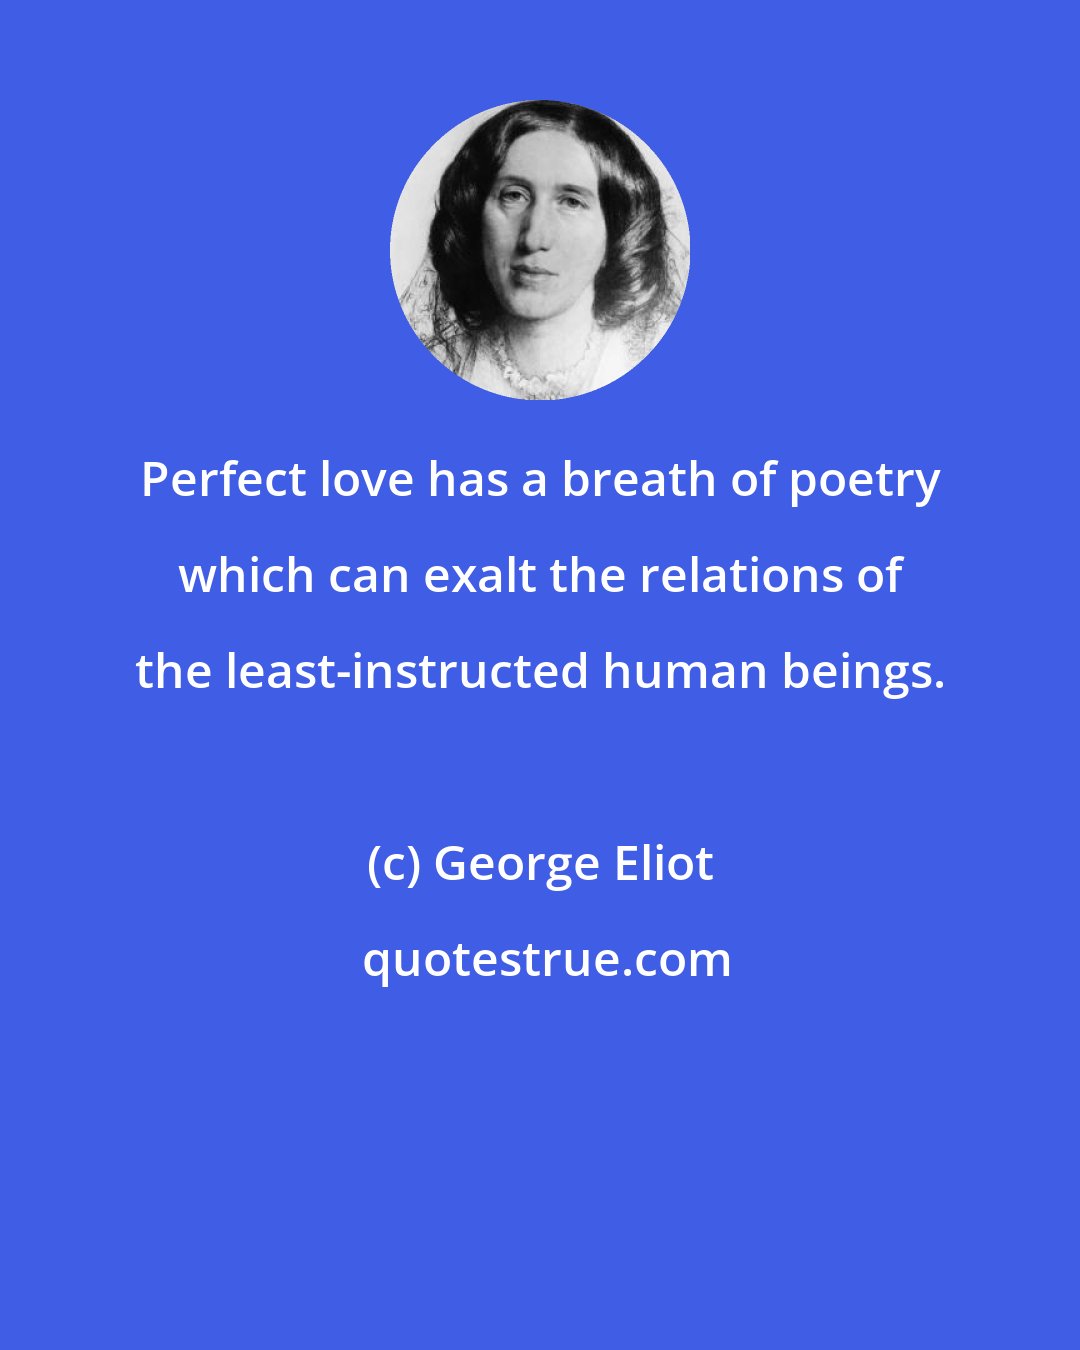 George Eliot: Perfect love has a breath of poetry which can exalt the relations of the least-instructed human beings.